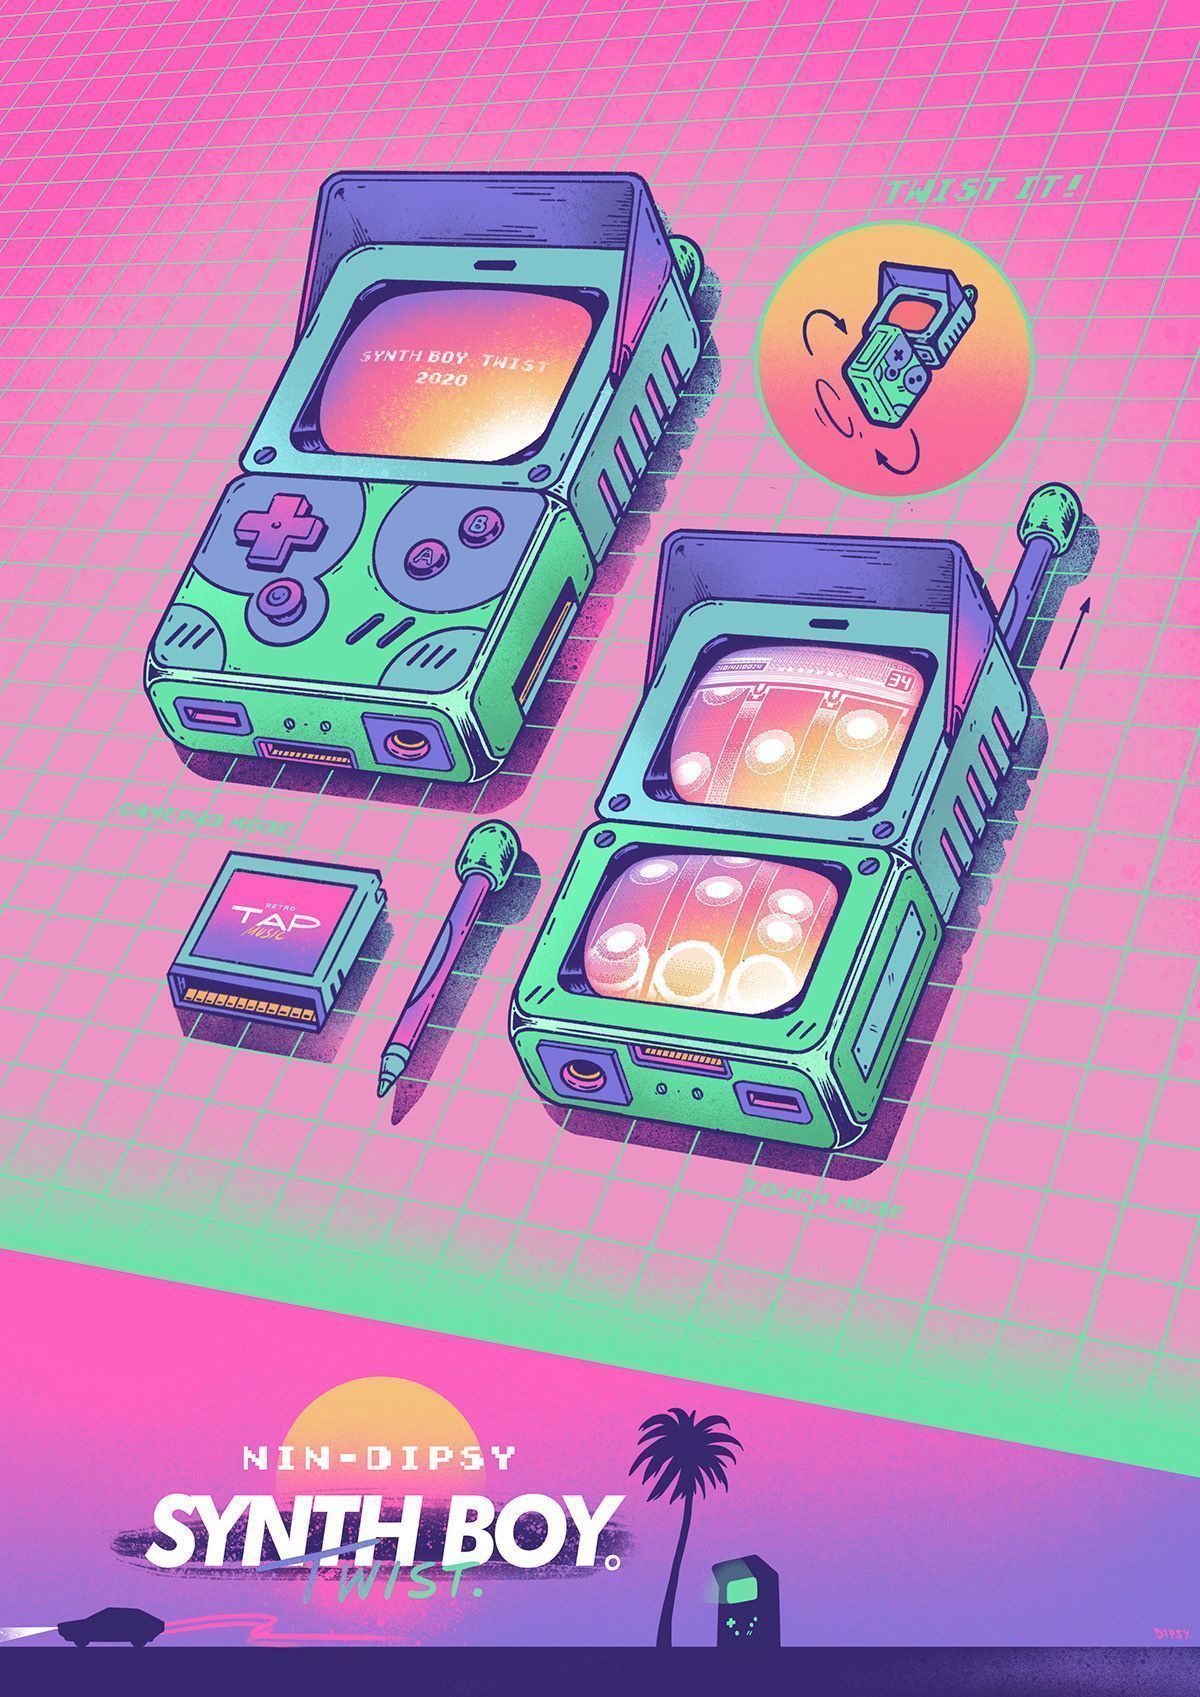 Synth Boy, a retro gaming device with a palm tree in the background - Game Boy